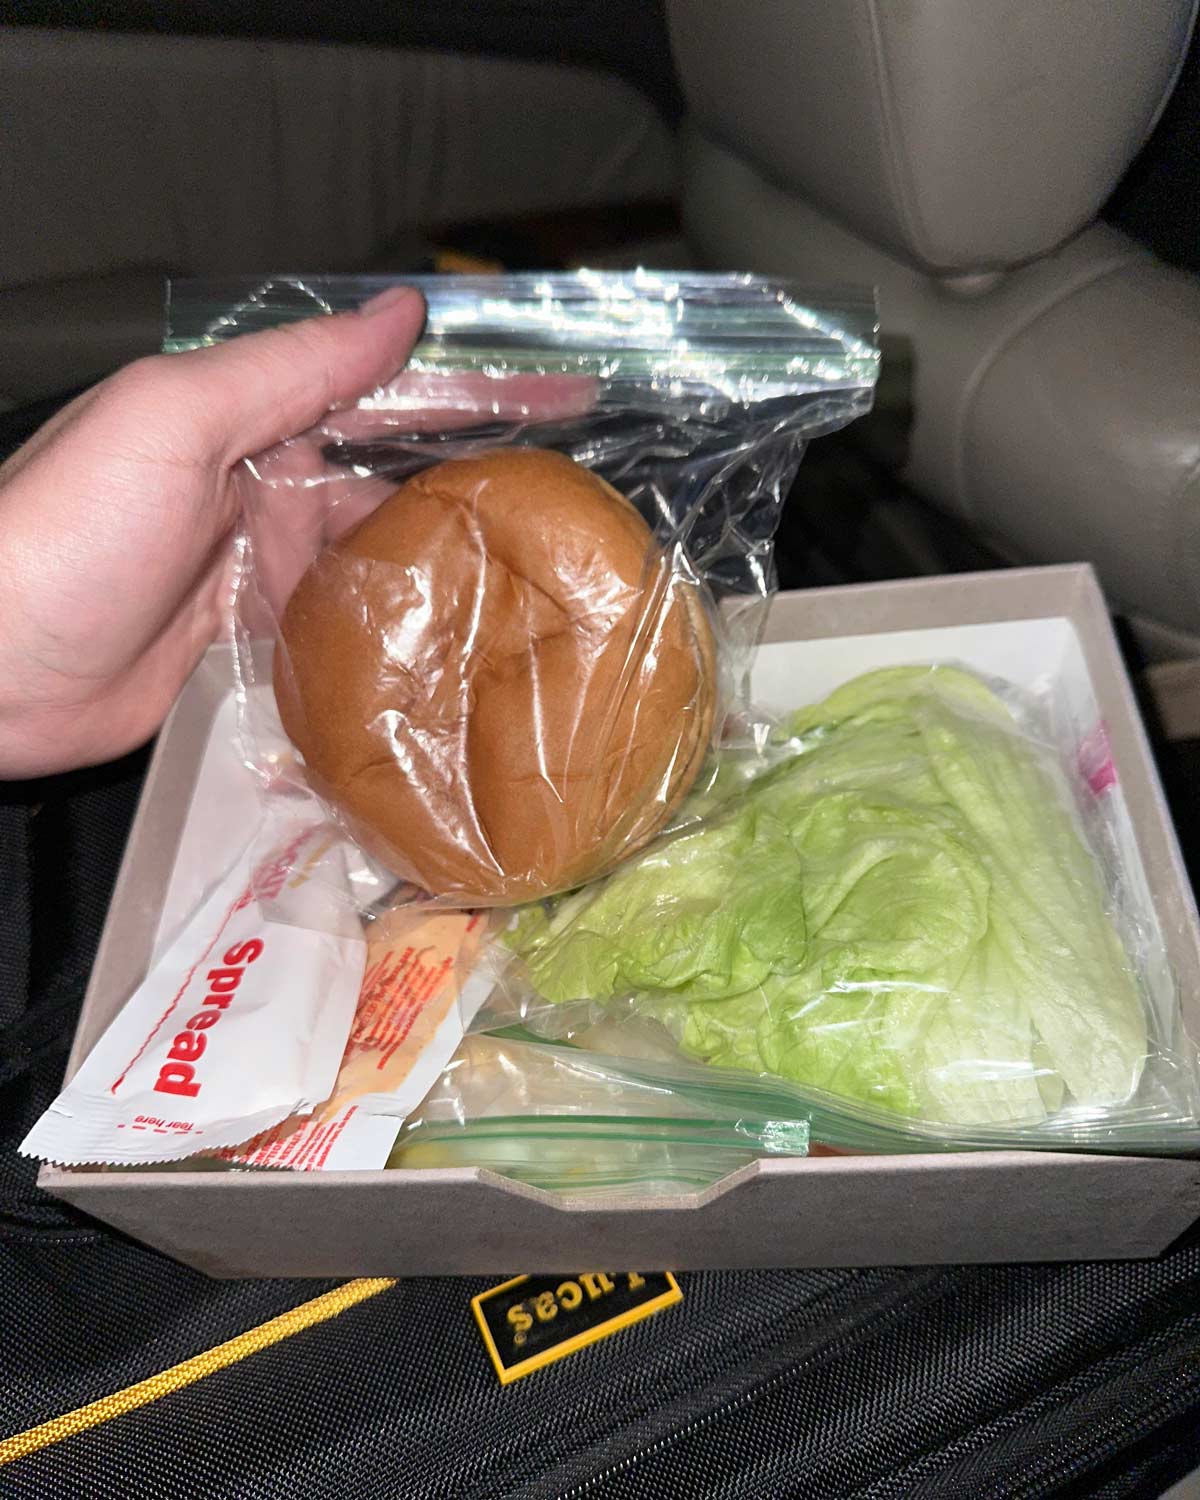 I moved out of California a year ago to the east coast. My mom is visiting and brought a disassembled In-N-Out Burger